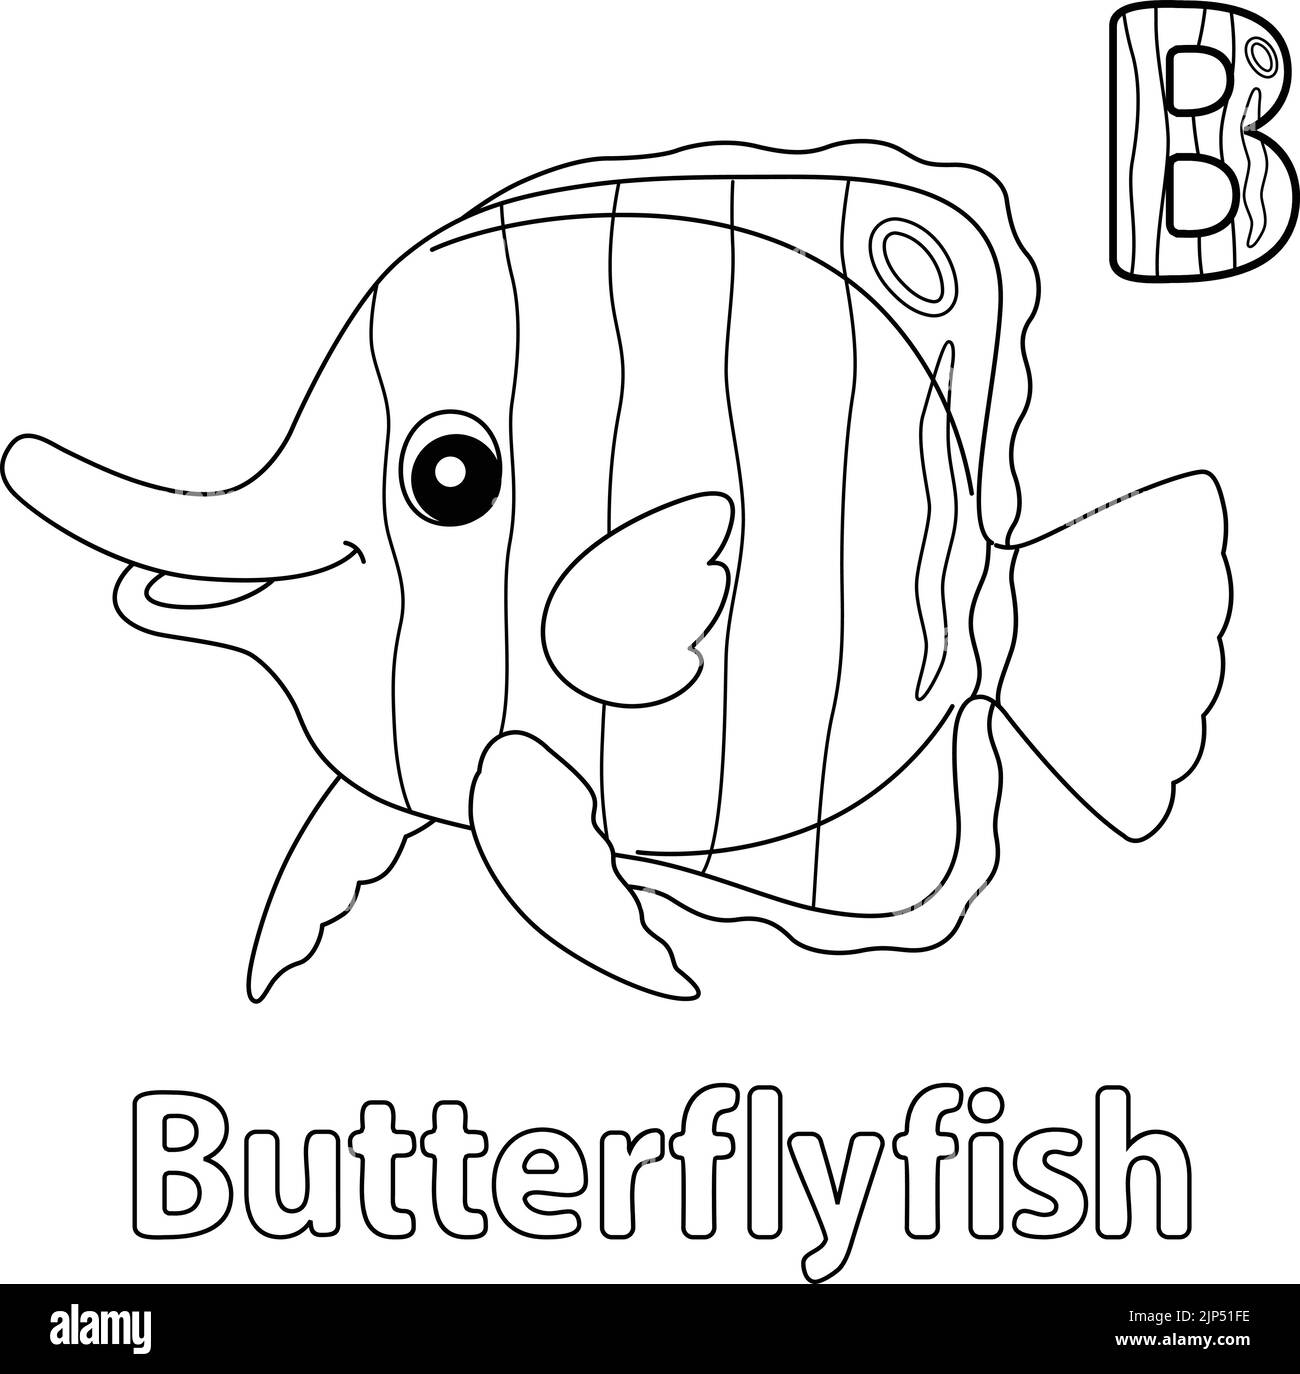 Butterflyfish Alphabet ABC Coloring Page B Stock Vector